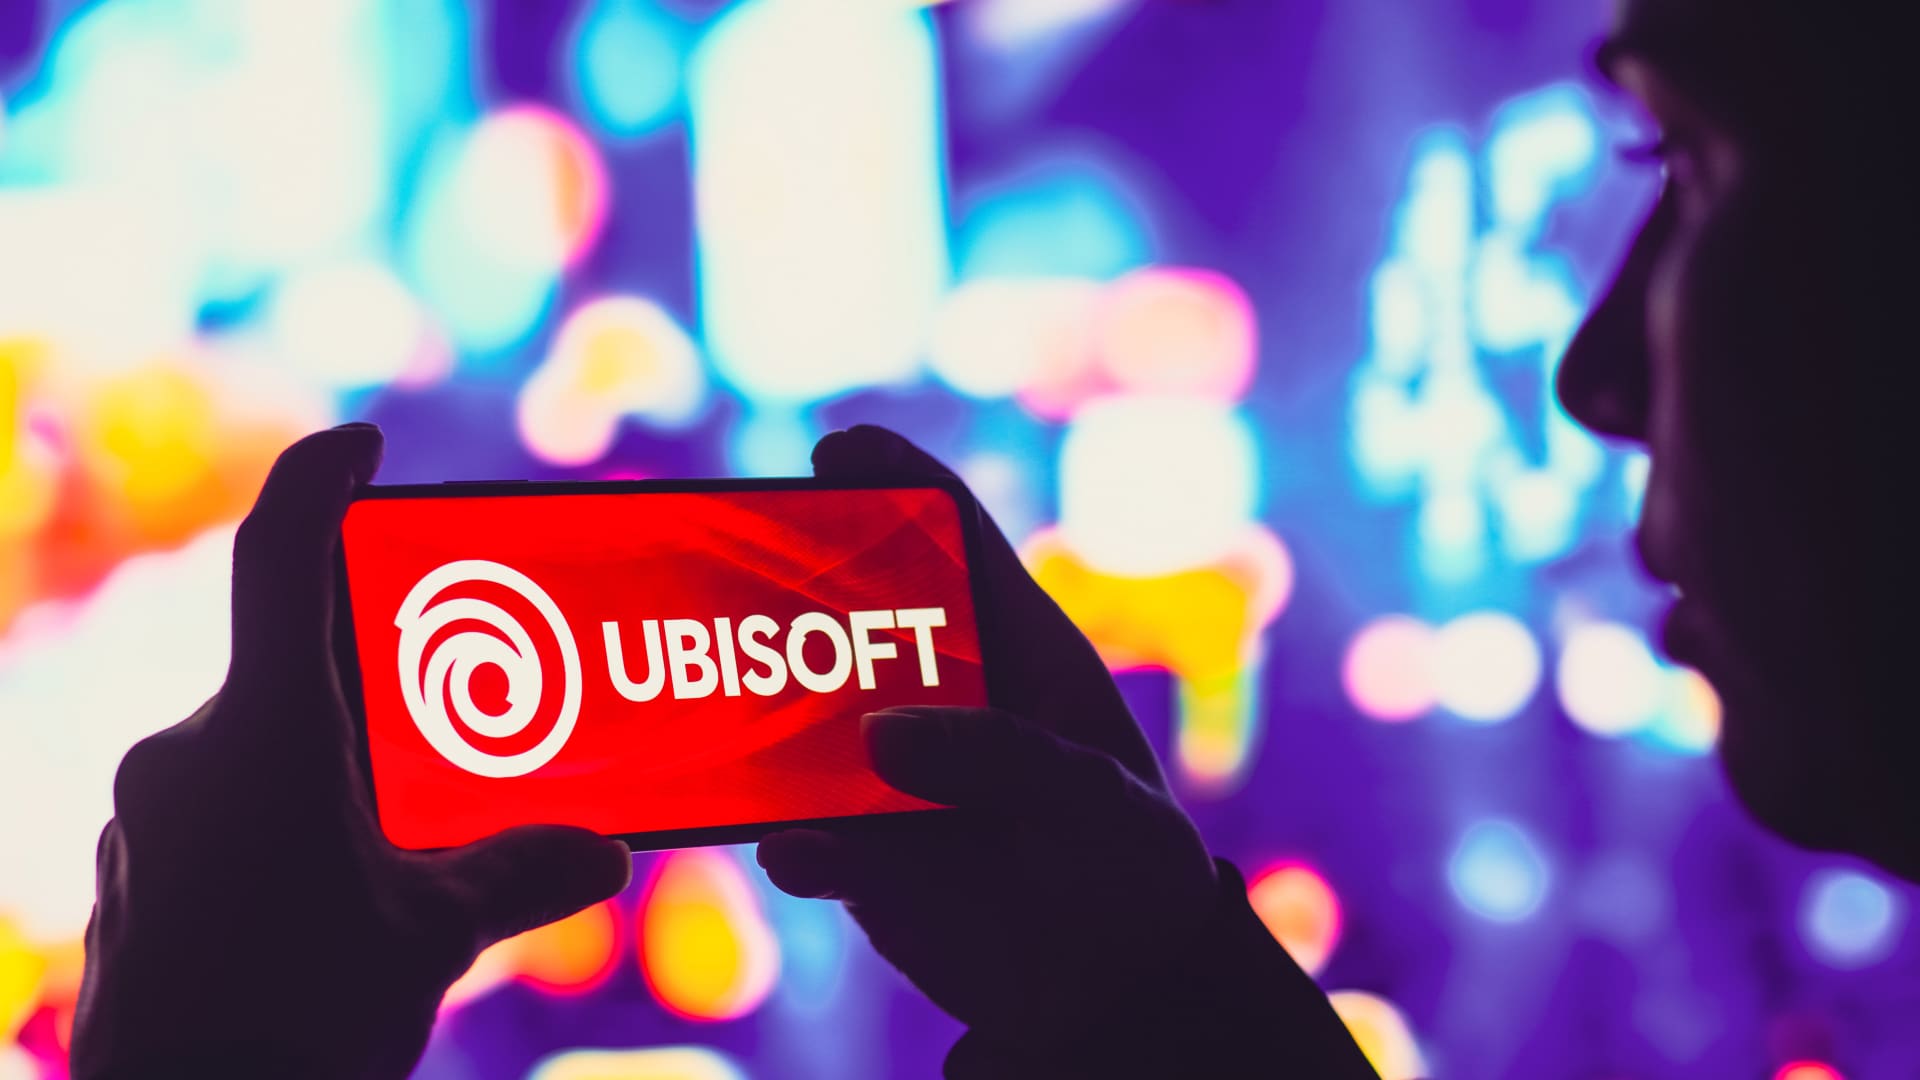 Assassin’s Creed maker Ubisoft plunges 16% after Chinese giant Tencent ups stake